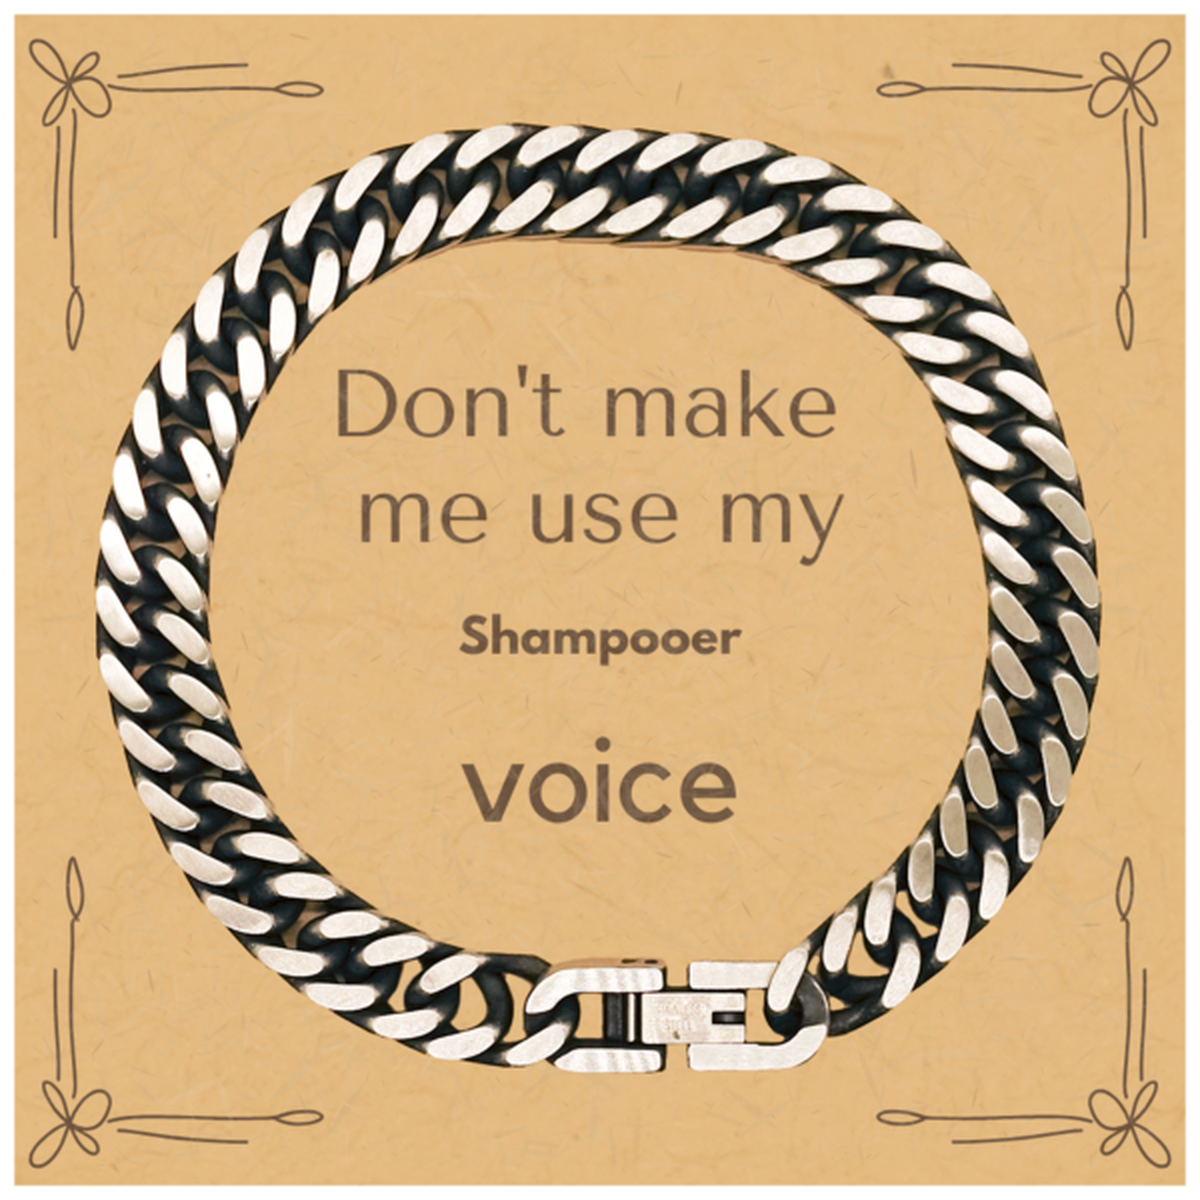 Don't make me use my Shampooer voice, Sarcasm Shampooer Card Gifts, Christmas Shampooer Cuban Link Chain Bracelet Birthday Unique Gifts For Shampooer Coworkers, Men, Women, Colleague, Friends